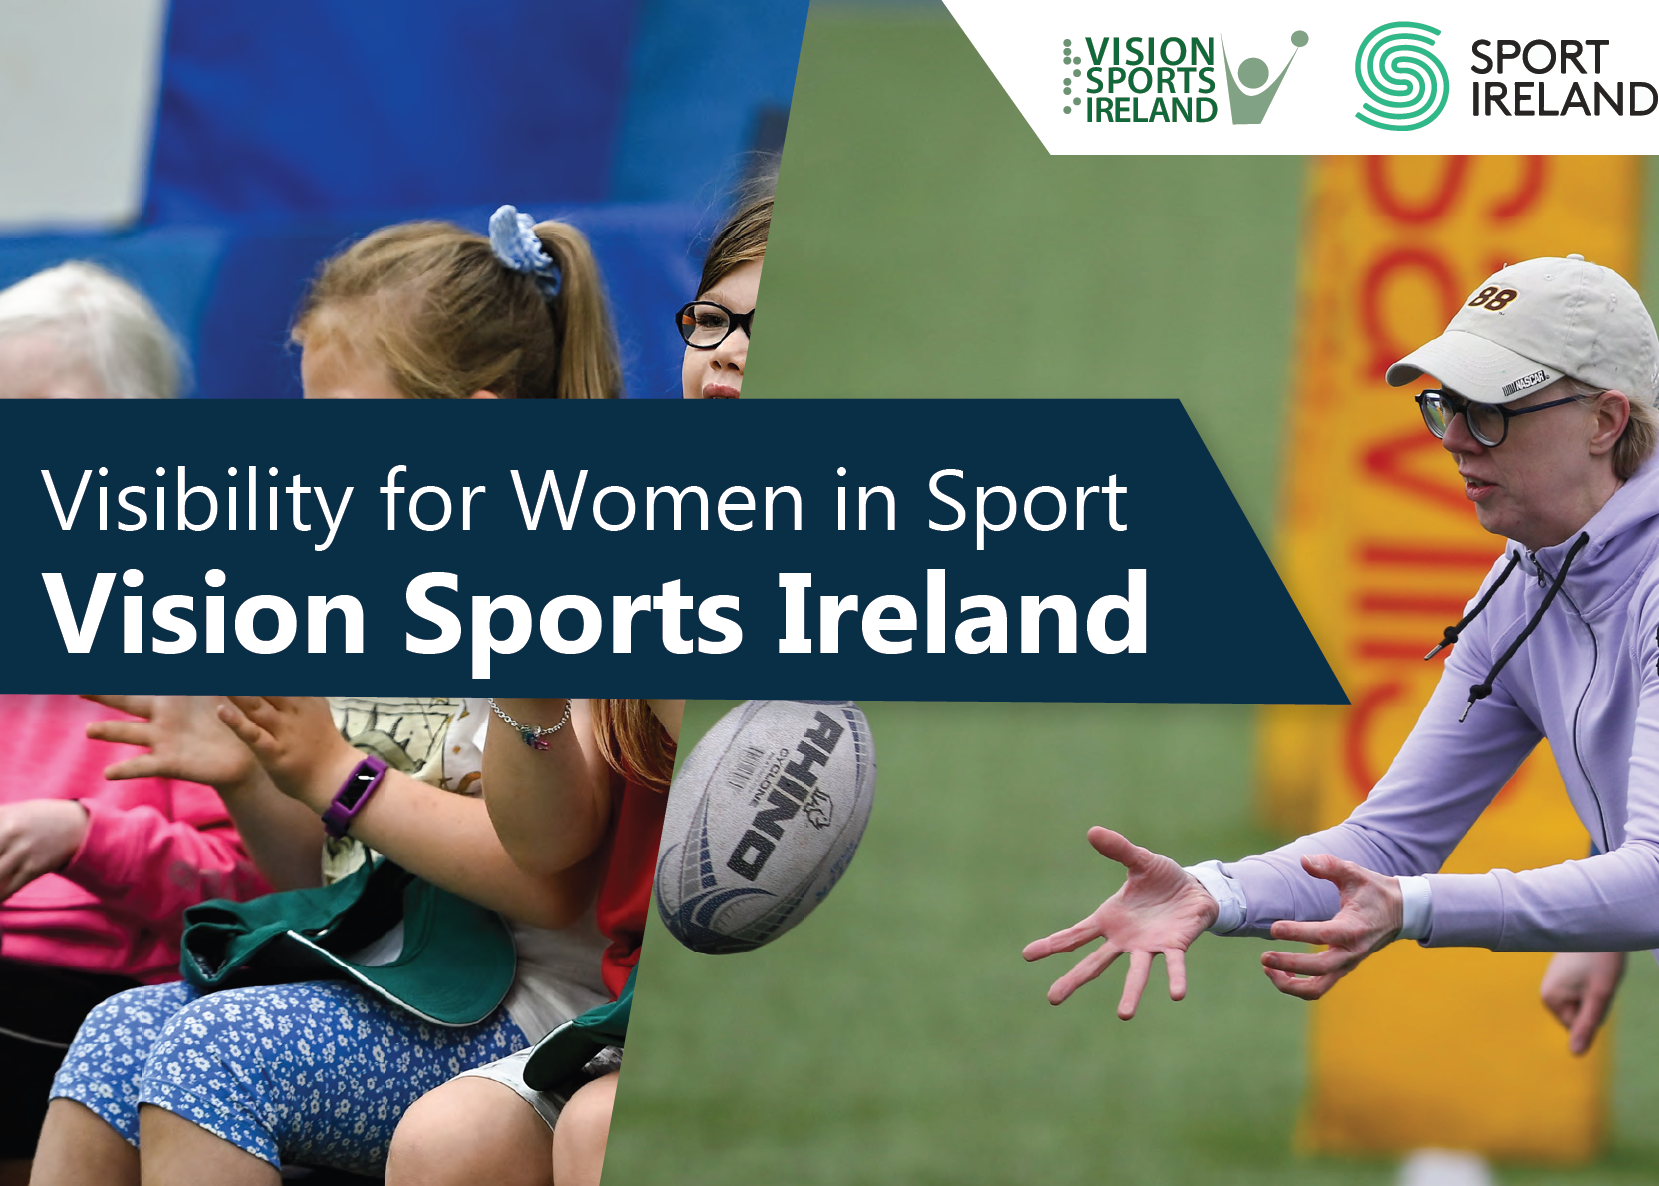 The front cover of the Visibility for Women in Sport research The background images are of a woman playing rugby and some girls laughing The text reads Visibility for Women in Sport Vision Sports Ireland The top right hand corner has the Vision Sports Ireland logo and the Sport Ireland logo